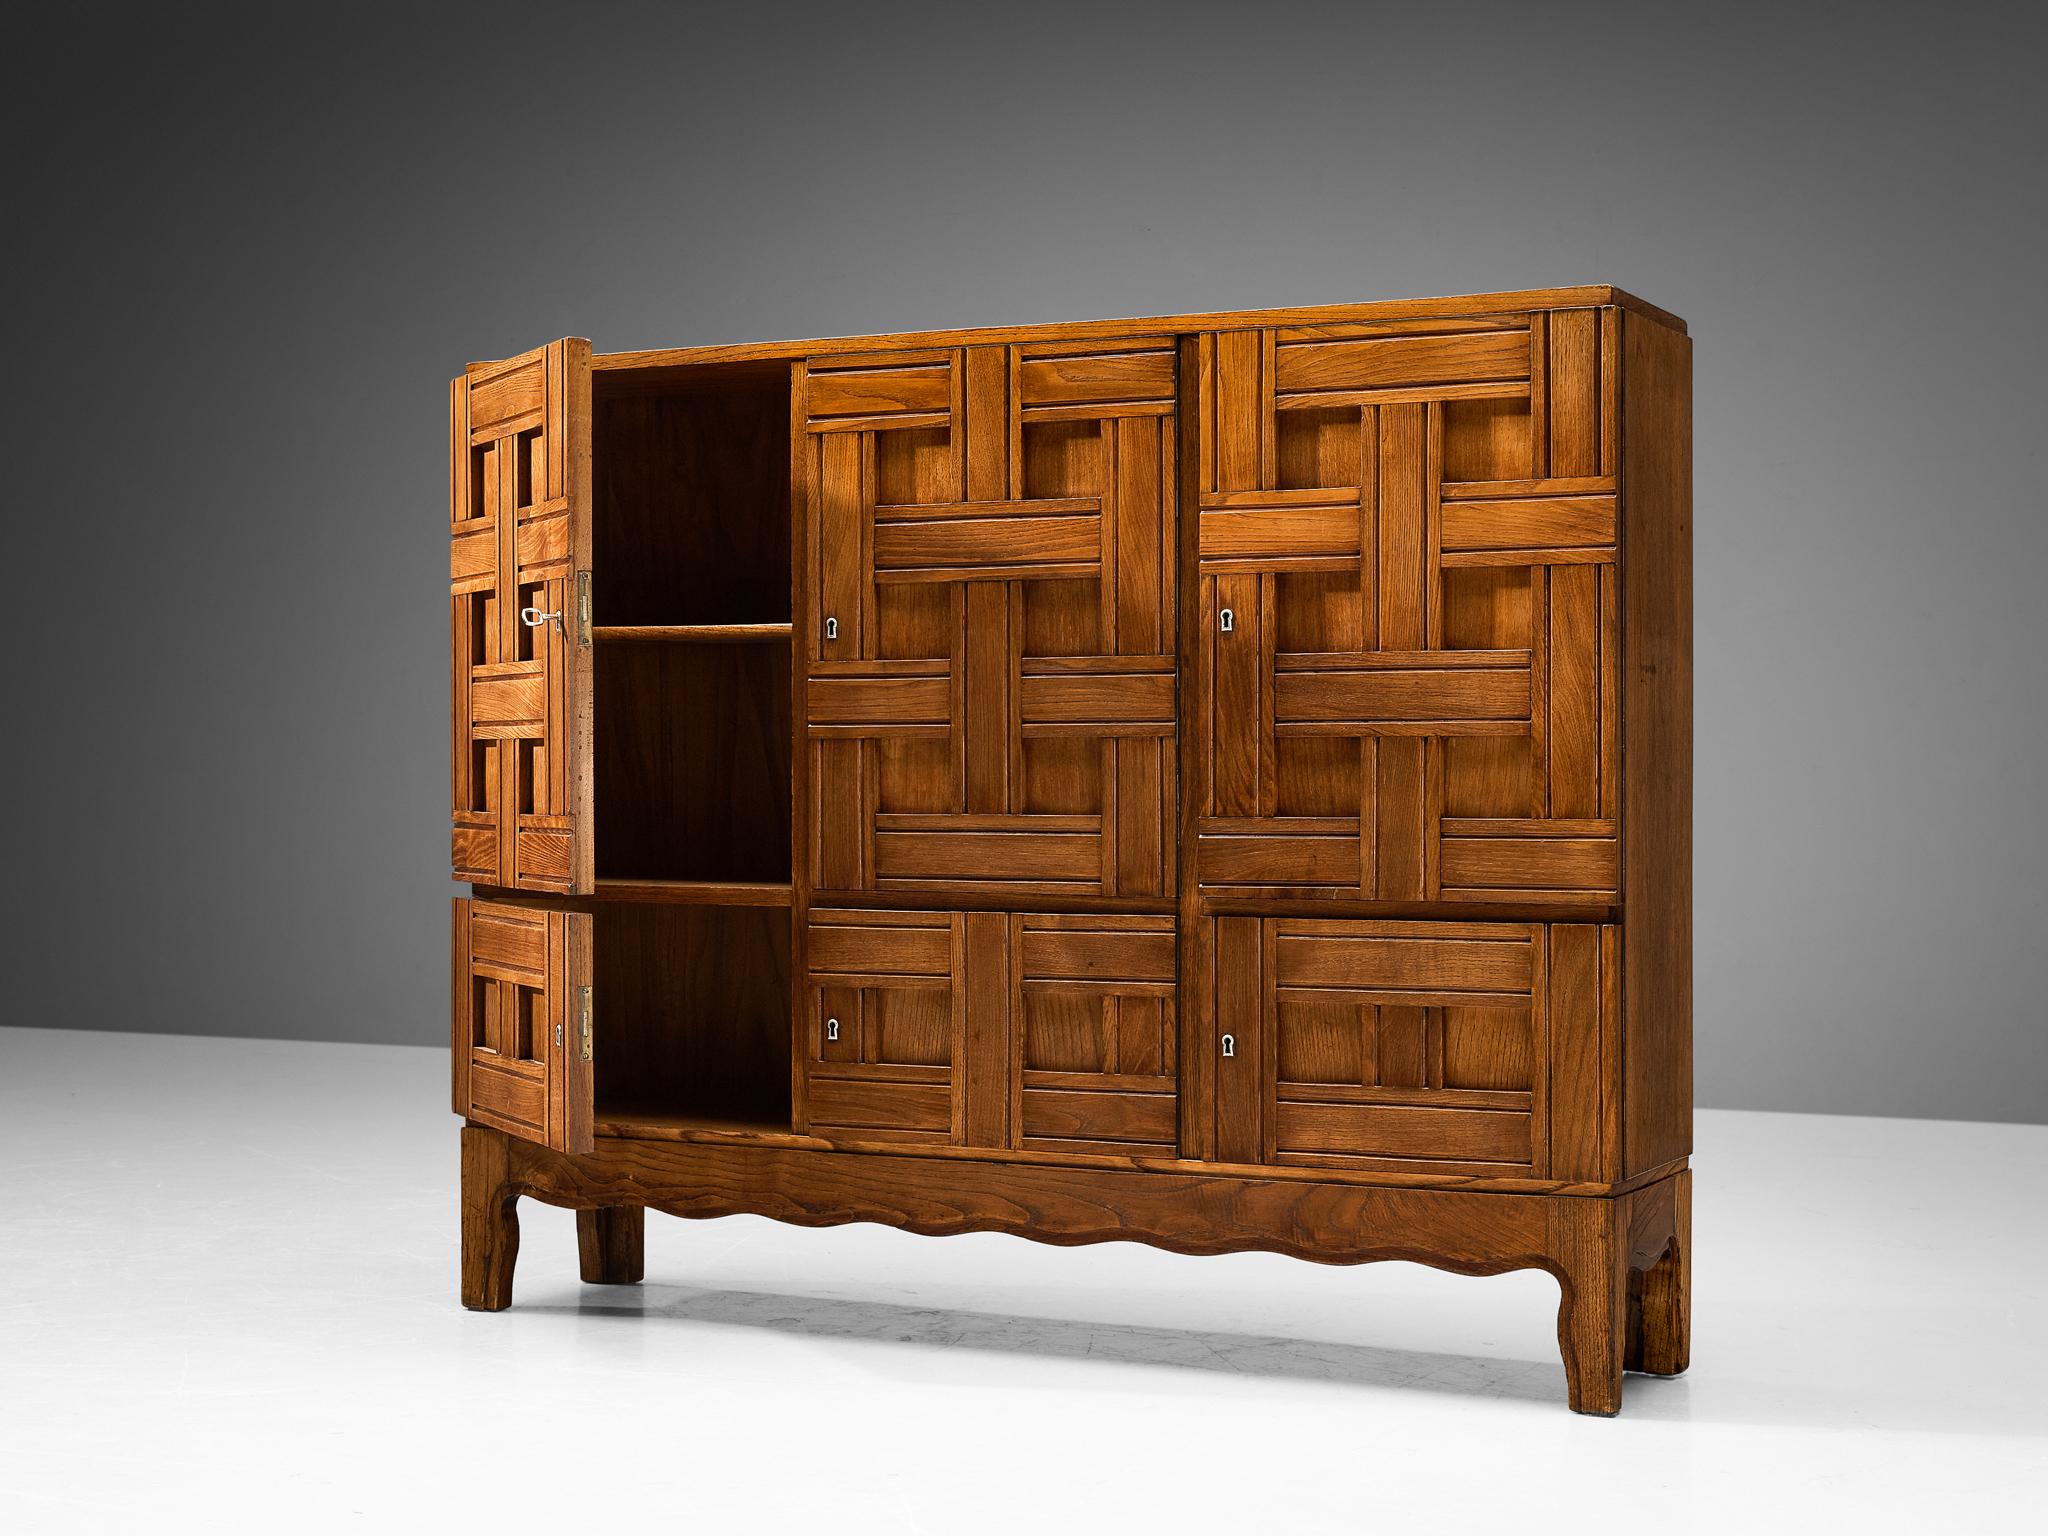 Stained Paolo Buffa Cabinet in Chestnut